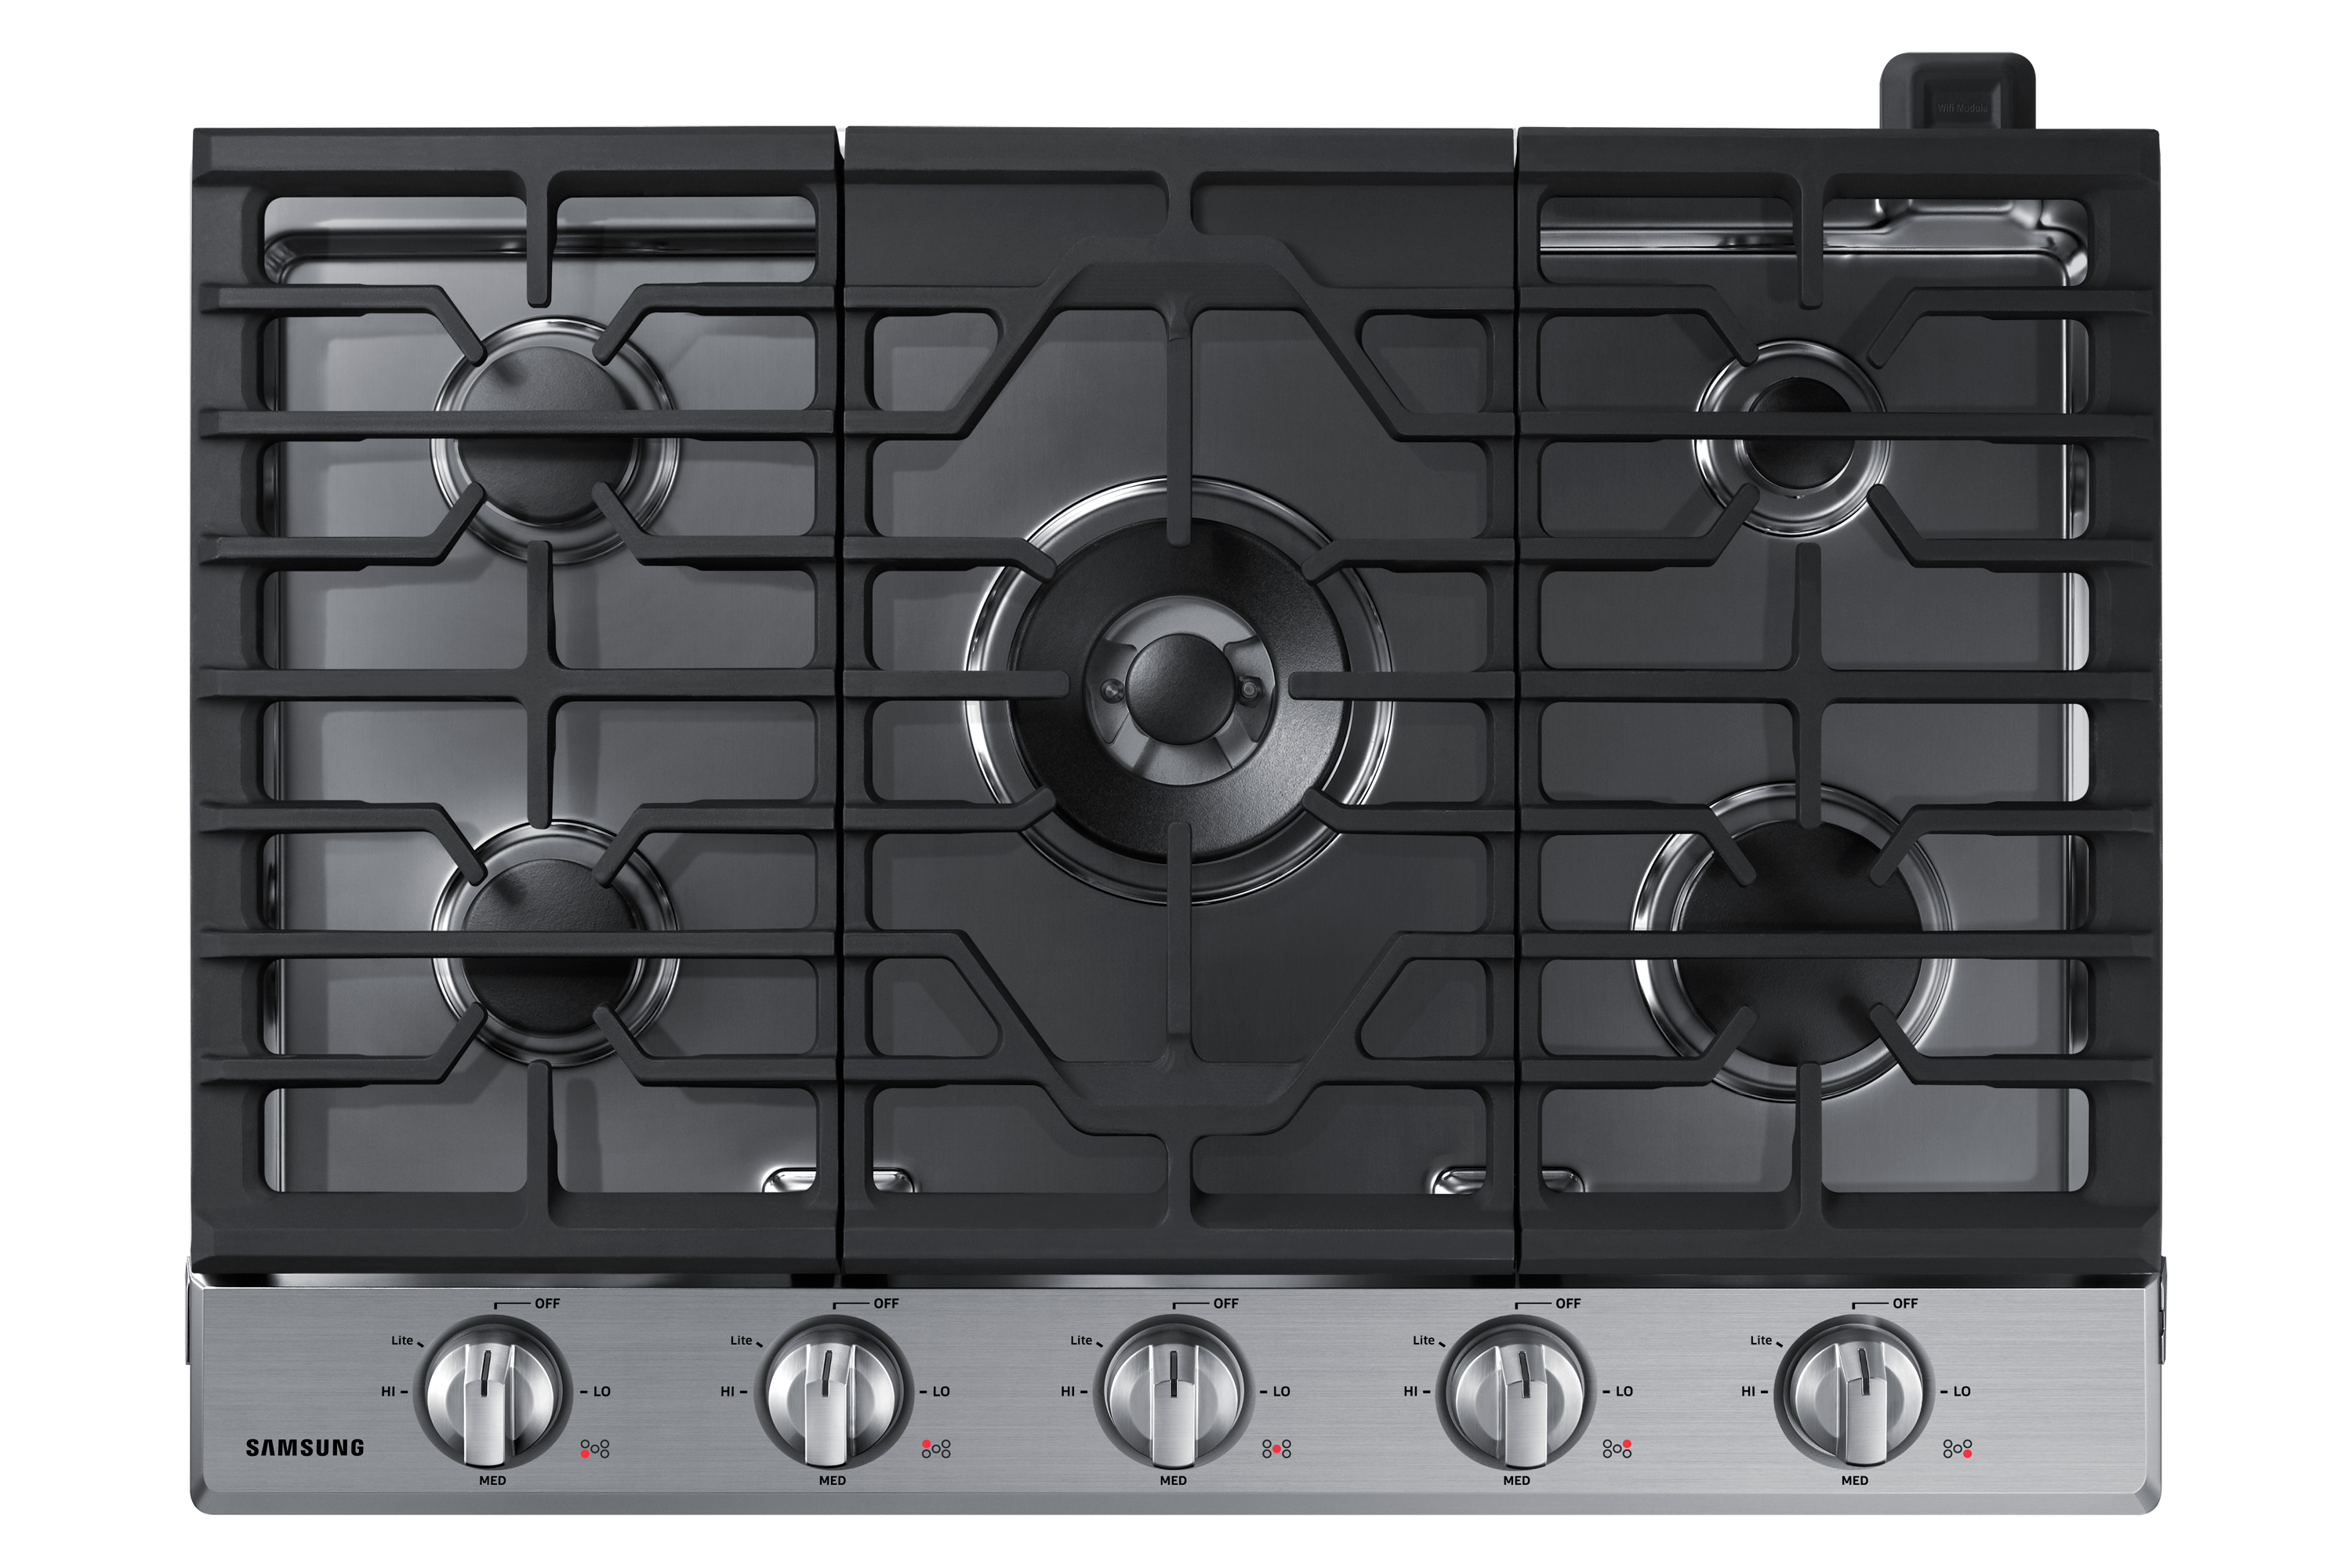 oven clipart stovetop